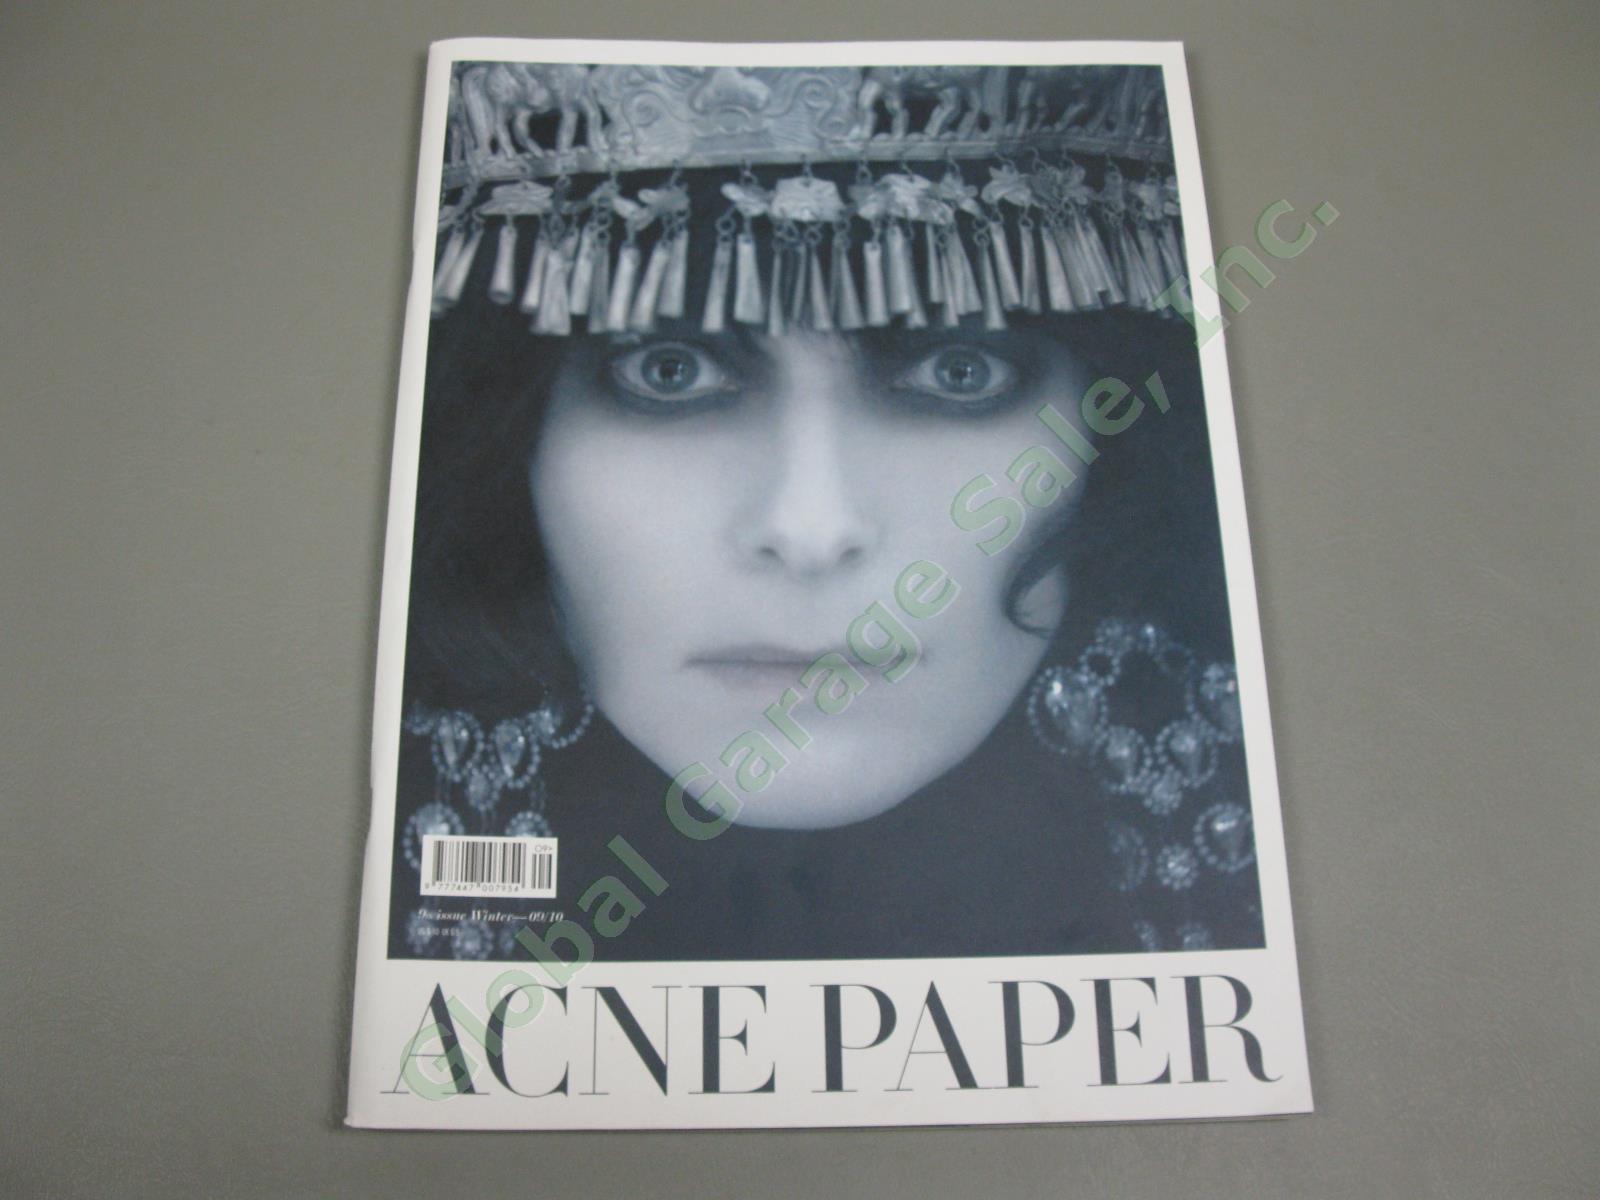 5 Acne Paper Magazines Lot 2007-2010 Issues #4-9 Photography Book Collection NR 17